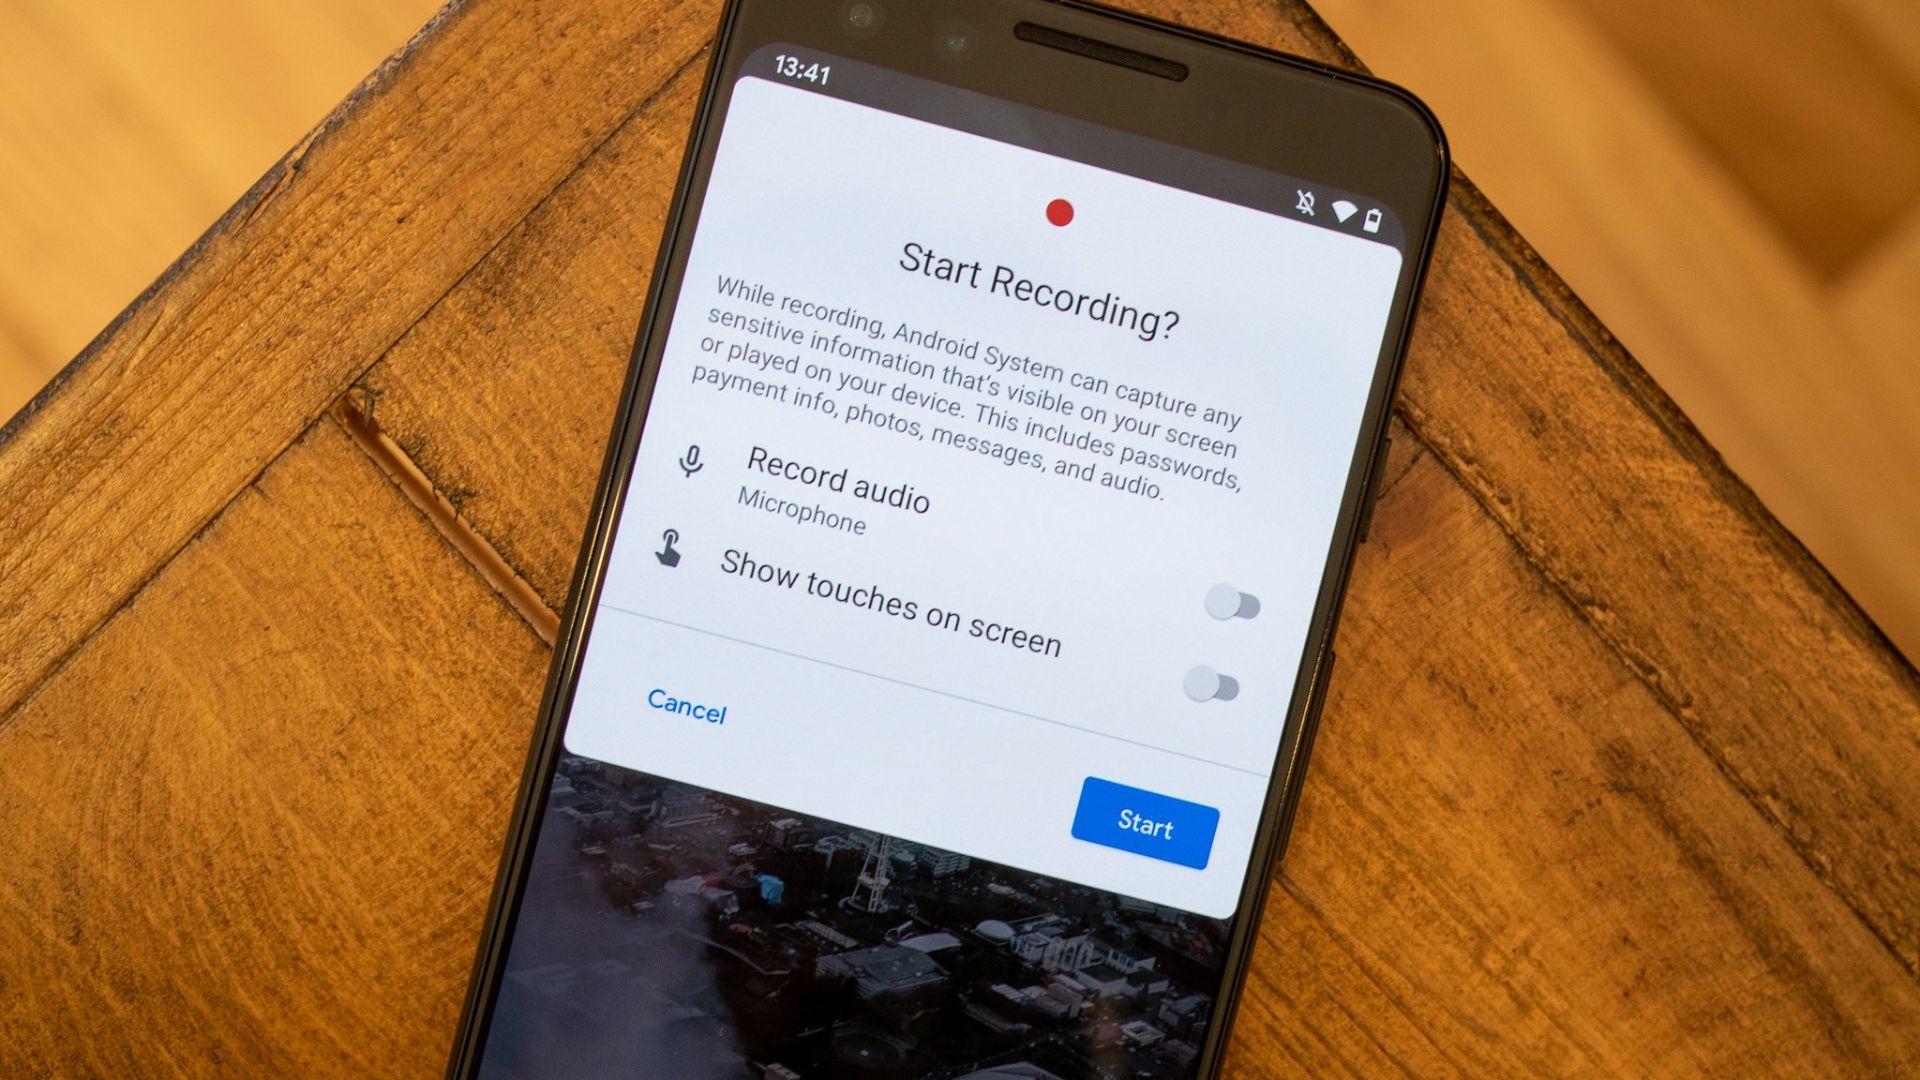 this image shows How to Use Android's Screen Recording Feature